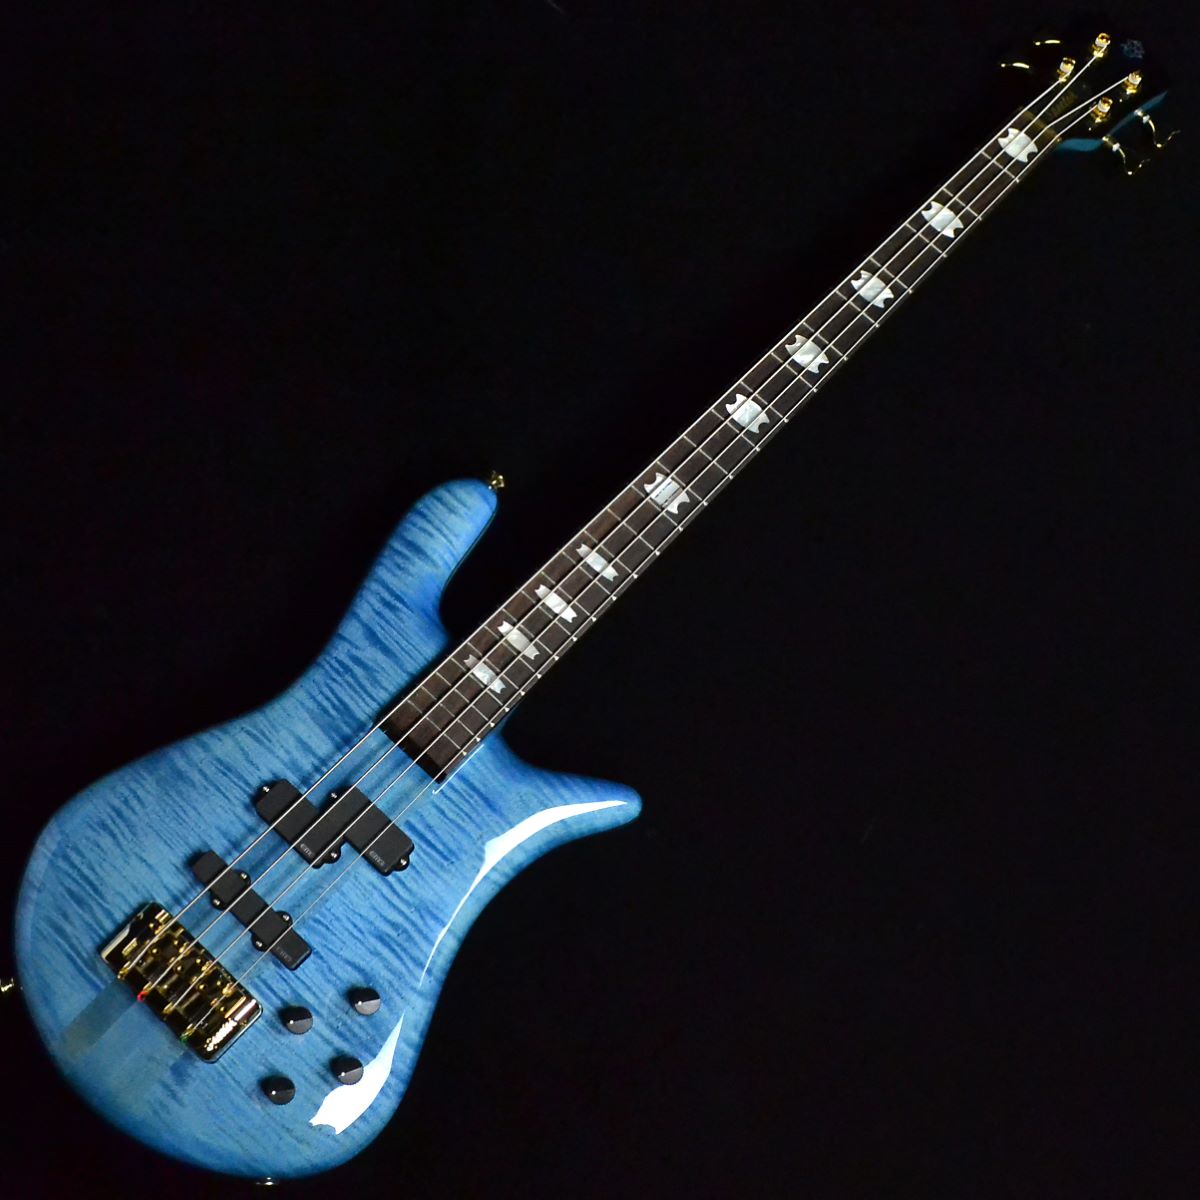 Spector EURO 4LX EX PW BBL Gloss Limited スペクター 【 郡山アティ 